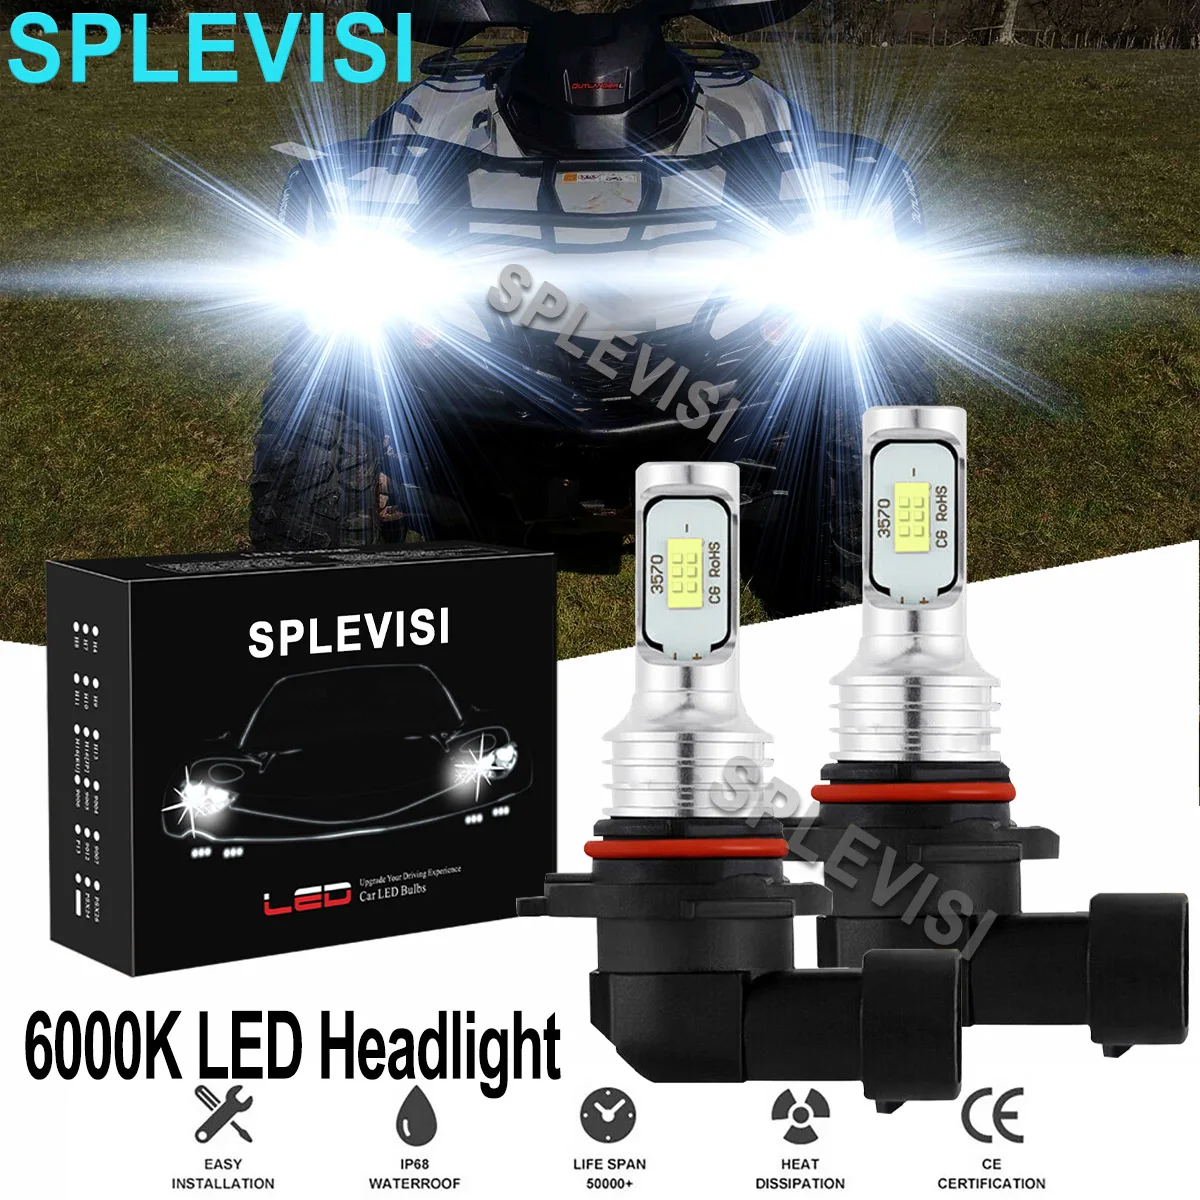 2x70W 6000K White LED Headlights For Can Am Outlander 500 2013-2015 570 2018-2019 650 2013-2017 800R: 2012-2015 850 2017-2020